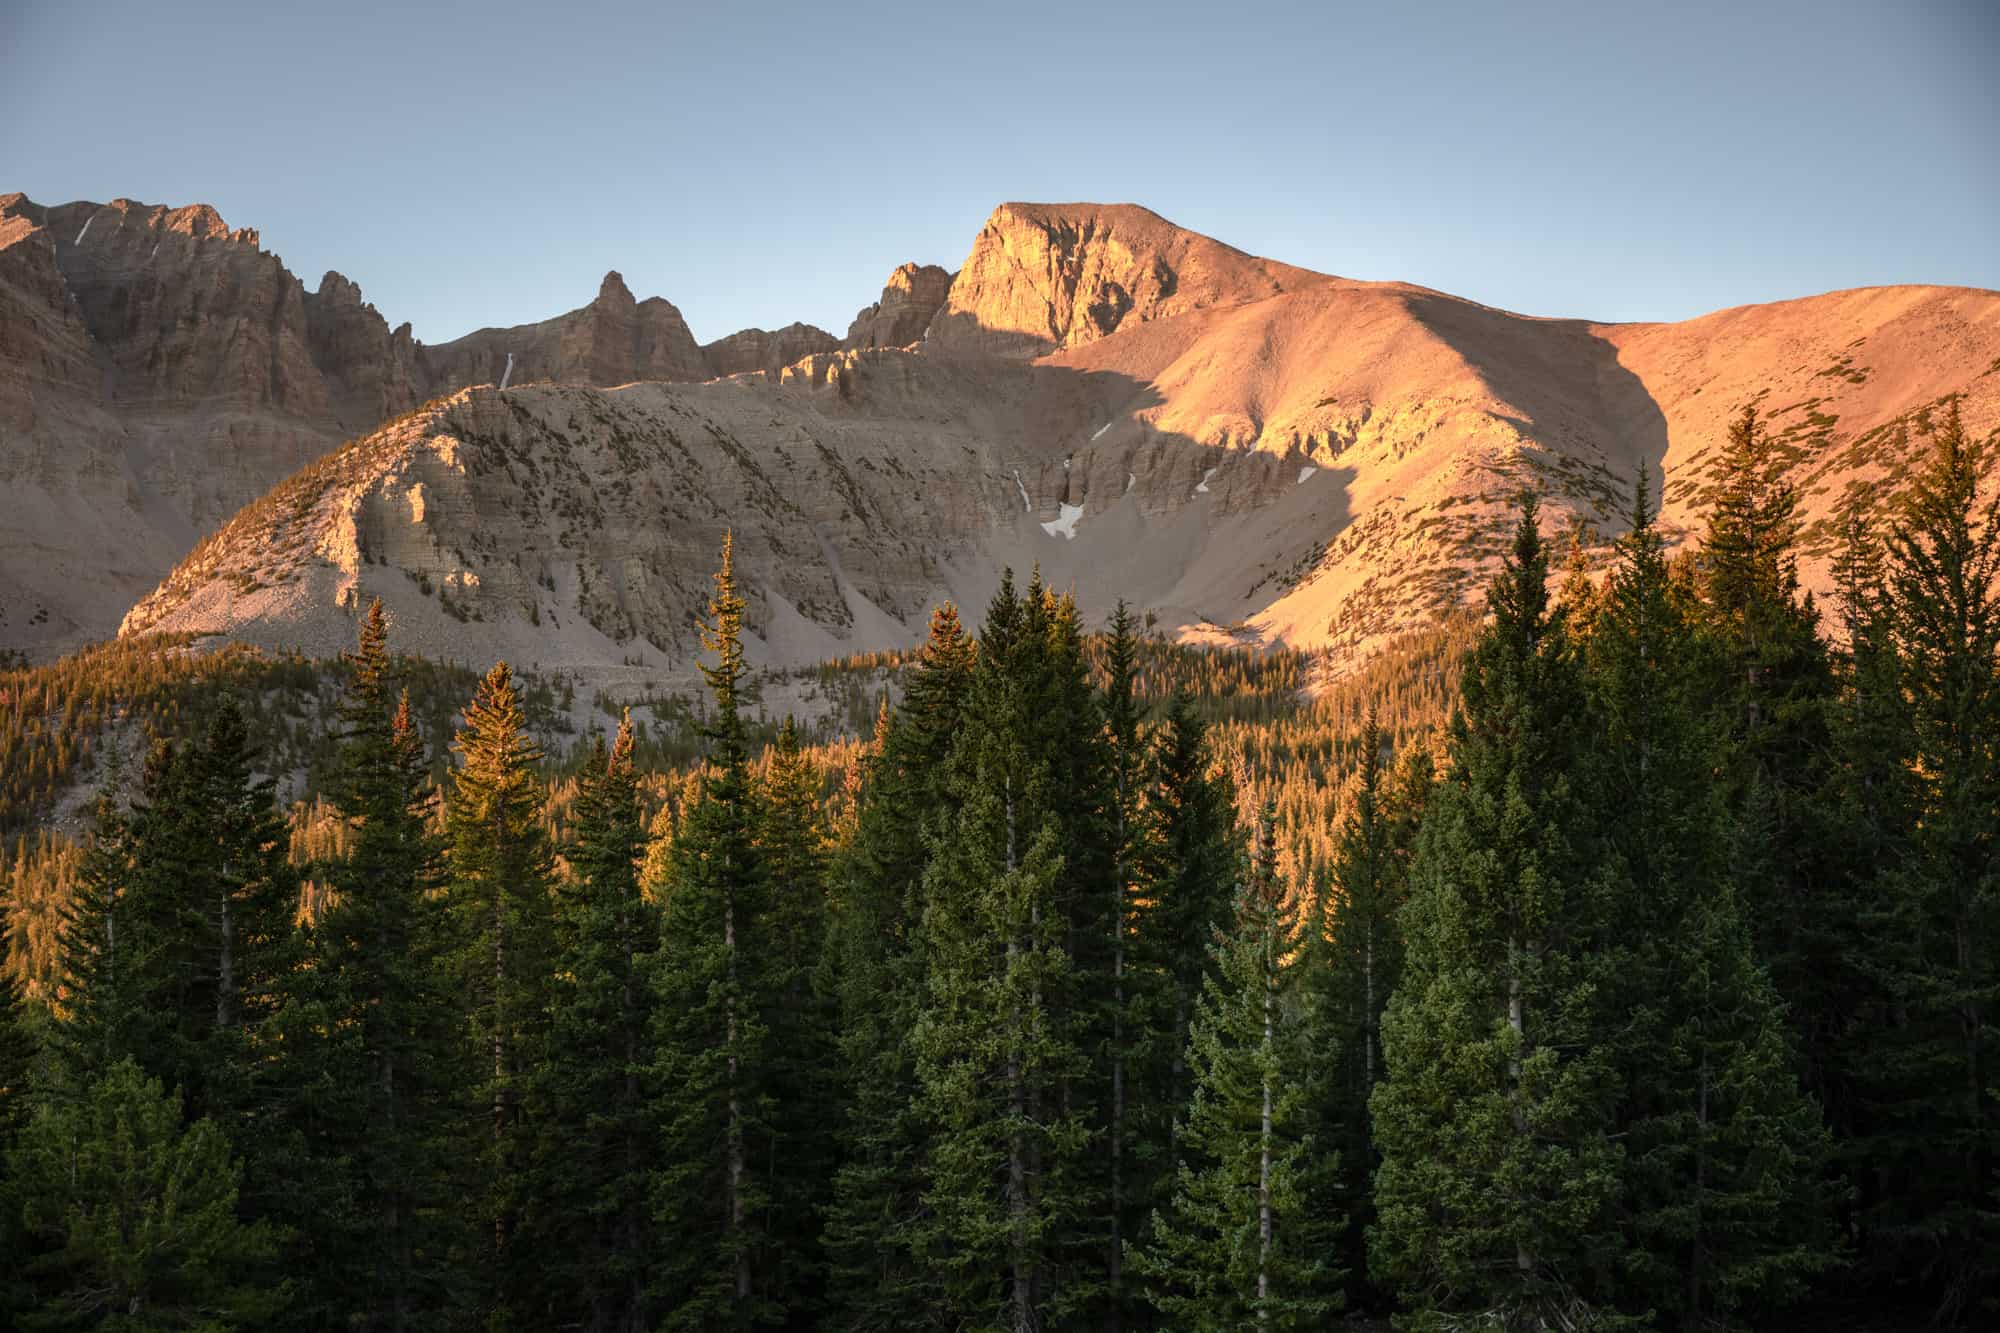 wheeler peak in morning light with pine trees in the foreground at great basin national park